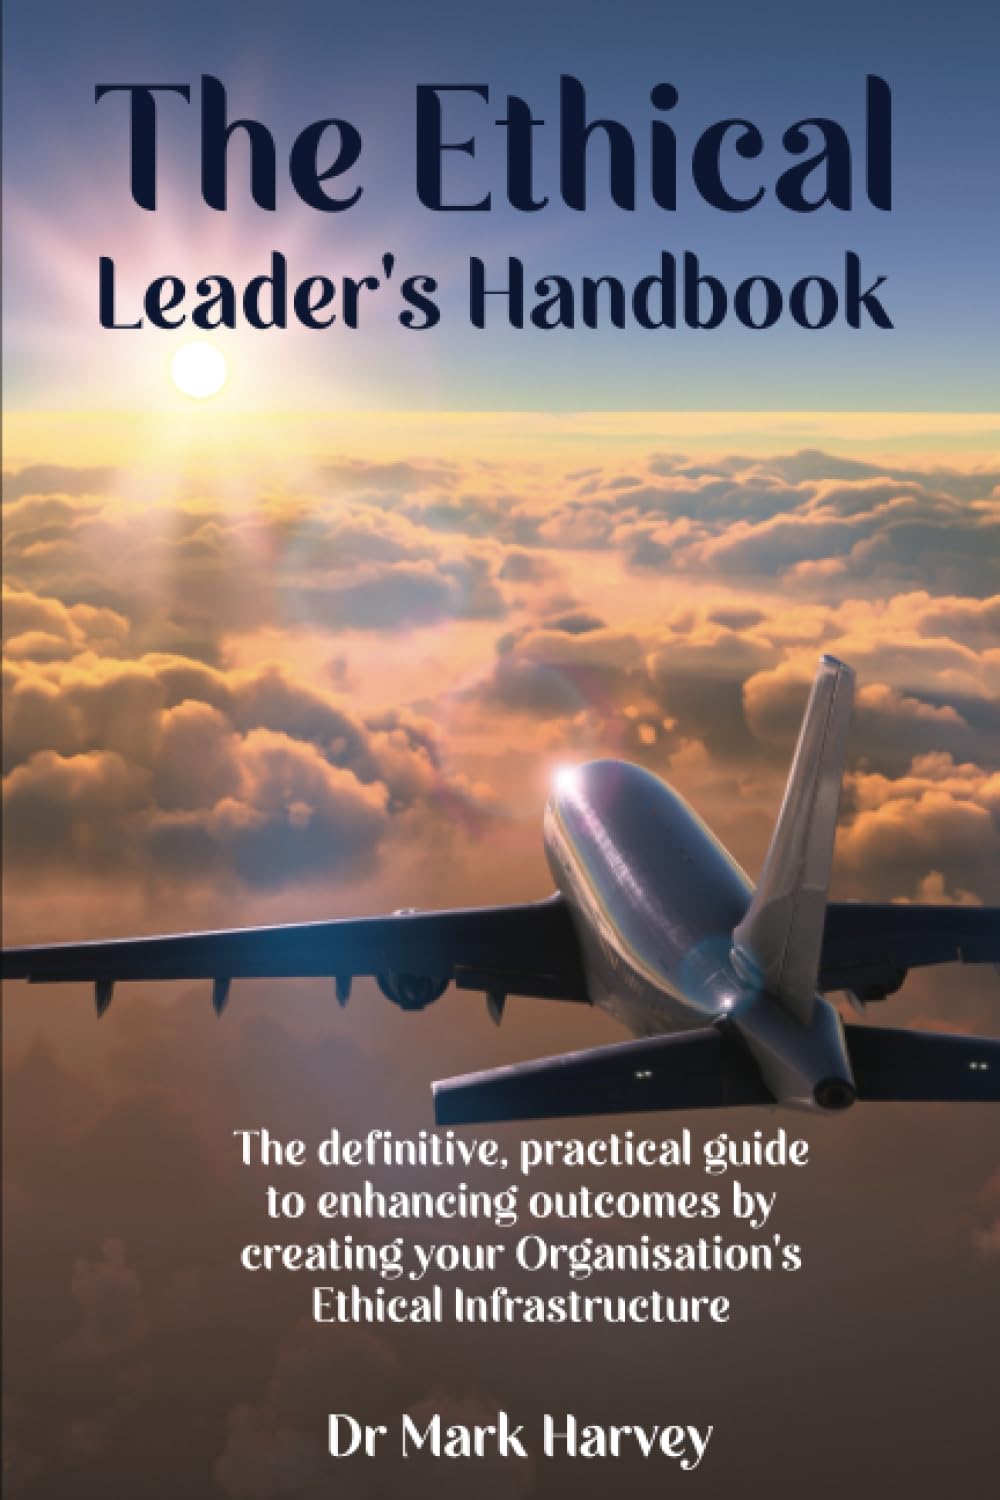 New Book Release: The Ethical Leader’s Handbook: The Definitive Guide to Enhancing Outcomes by Creating Your Organisation’s Ethical Infrastructure by Dr. Mark Harvey